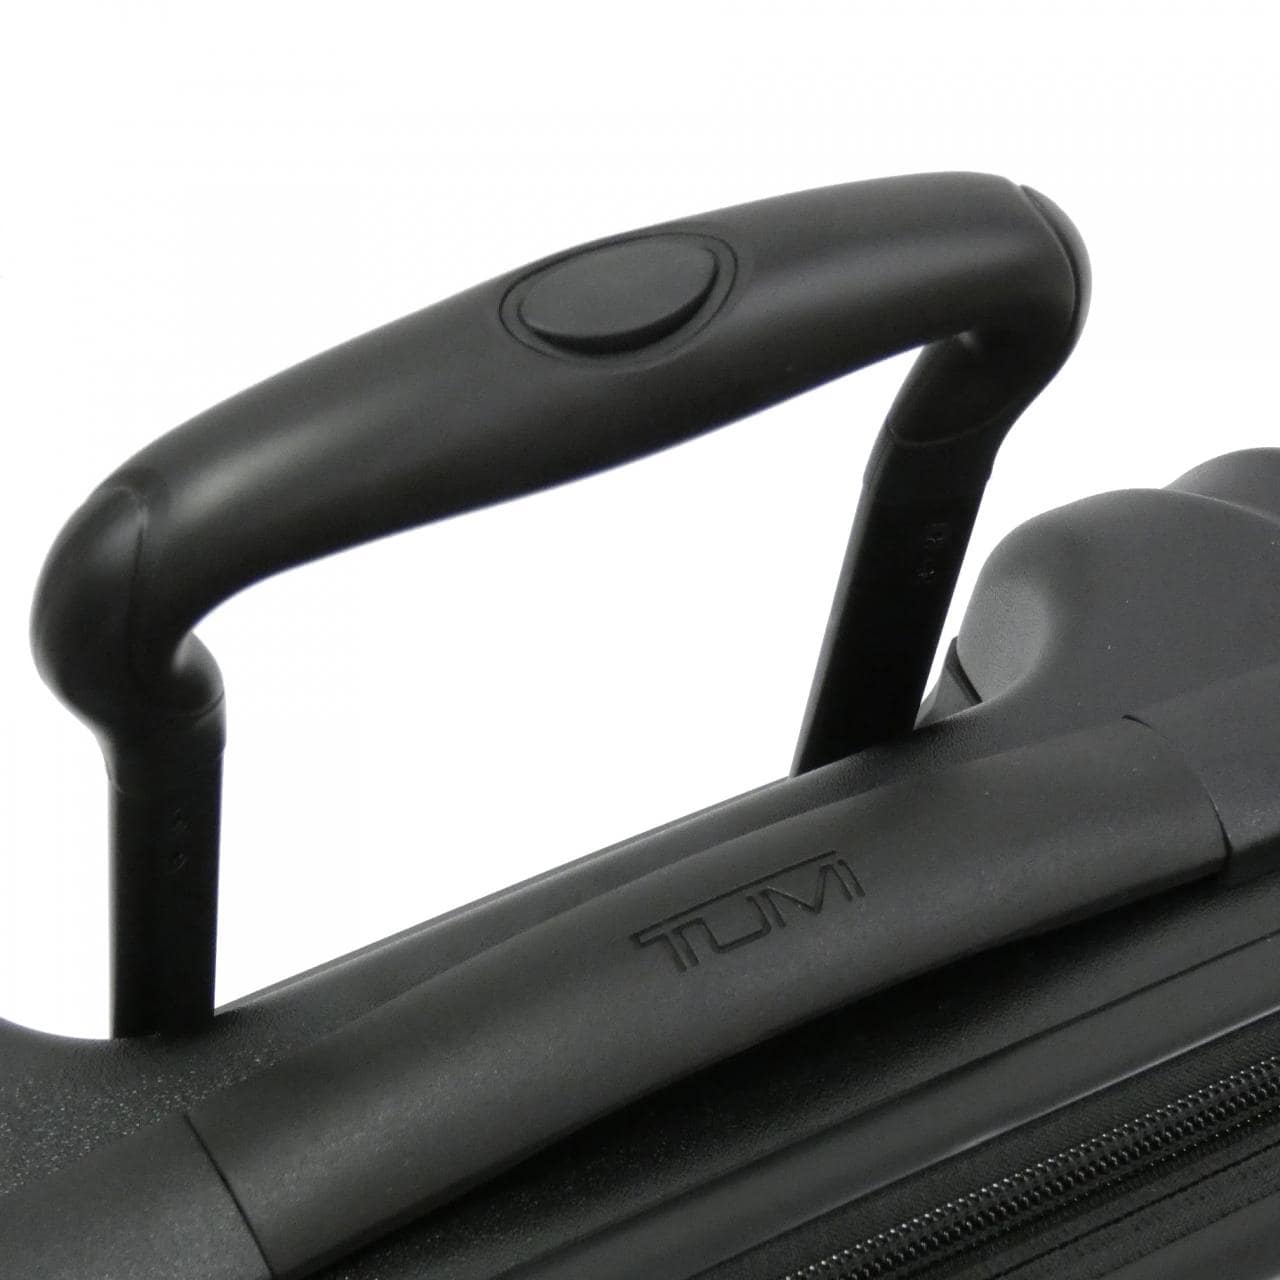 [BRAND NEW] Tumi 19 DEGREE NATIONAL Expandable 4 Wheel Carry-On 38L 1476766153 Carry Bag